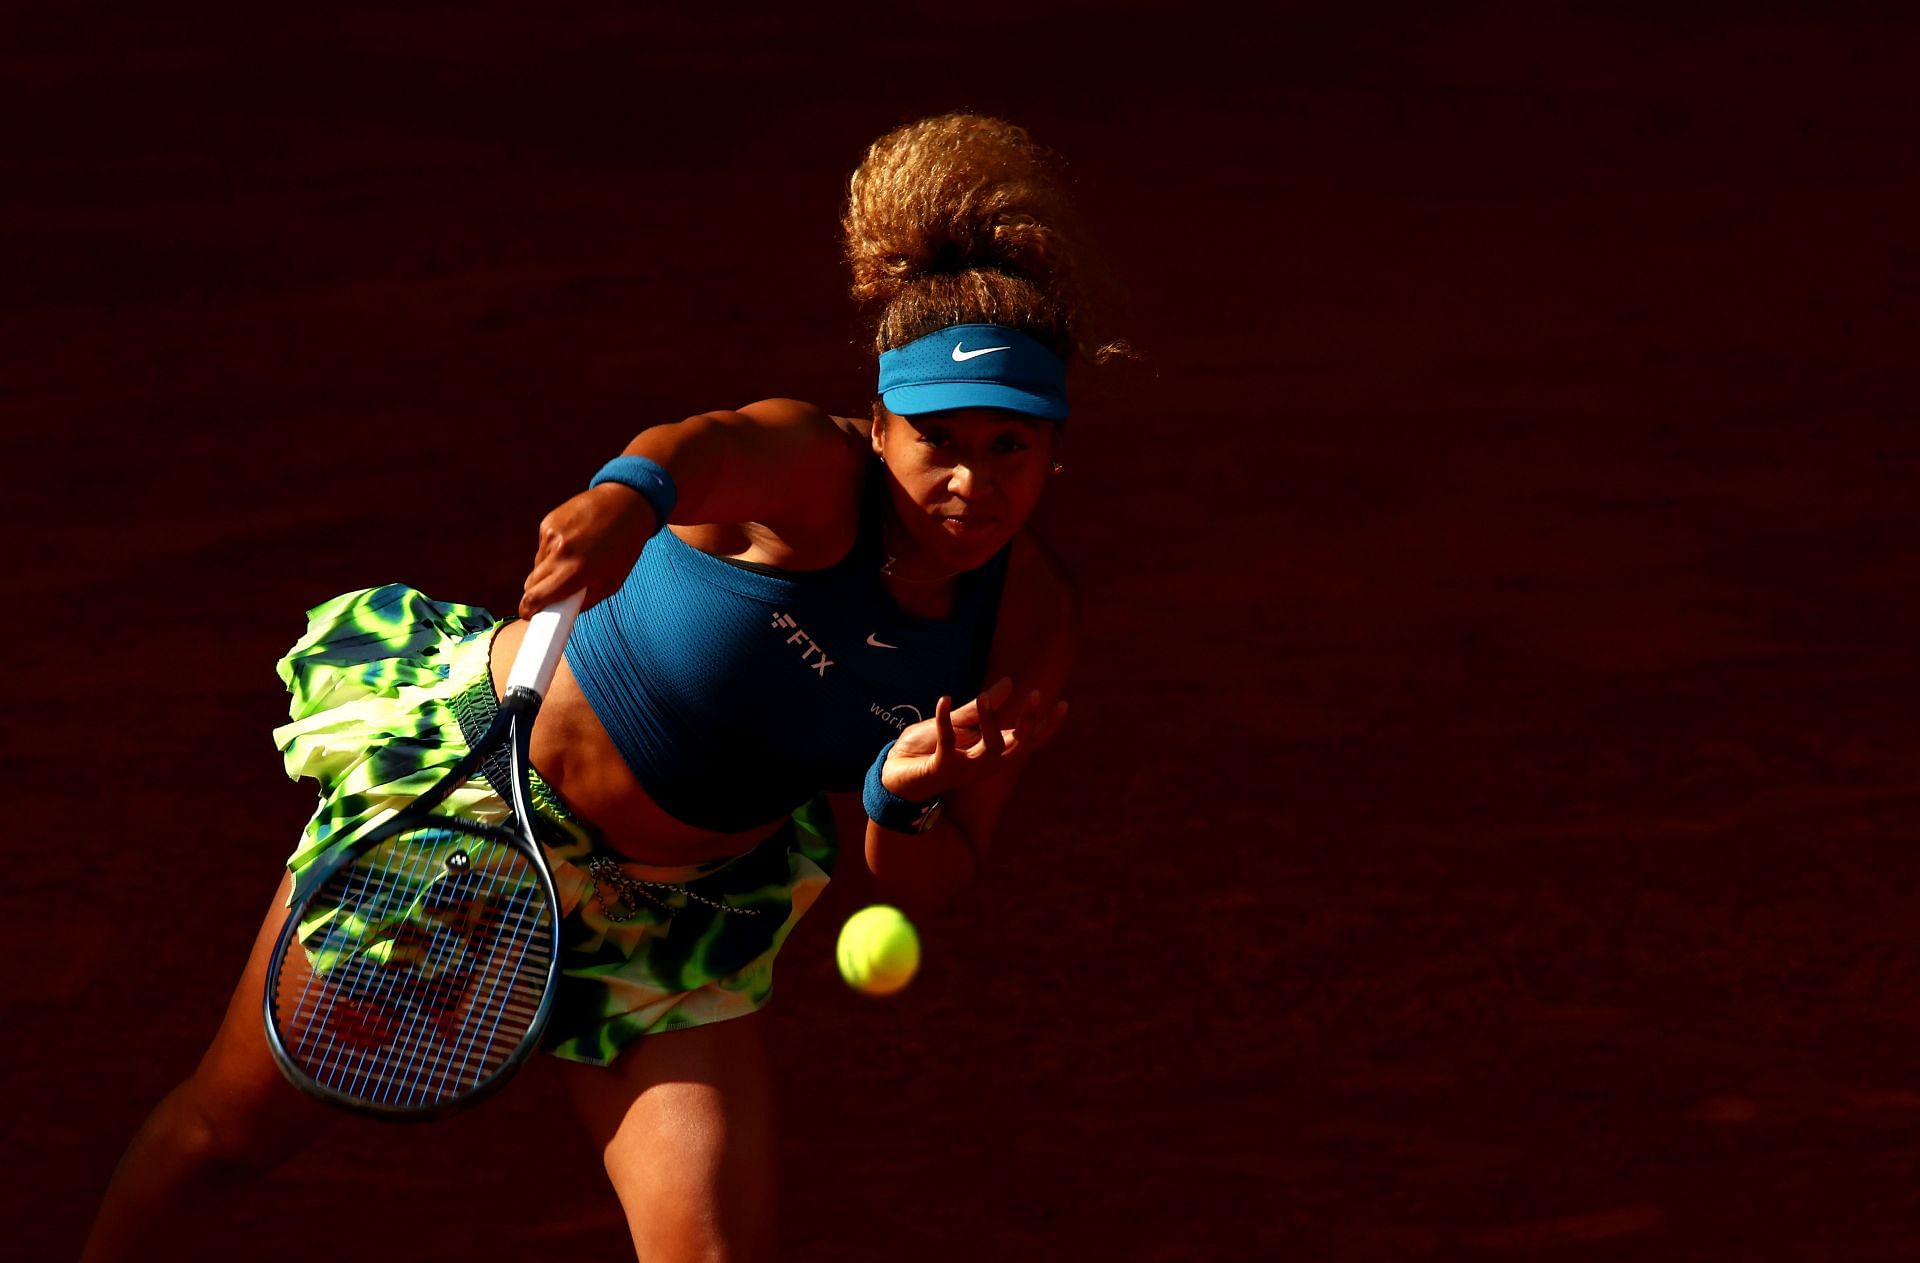 Naomi Osaka in action at the Madrid Open